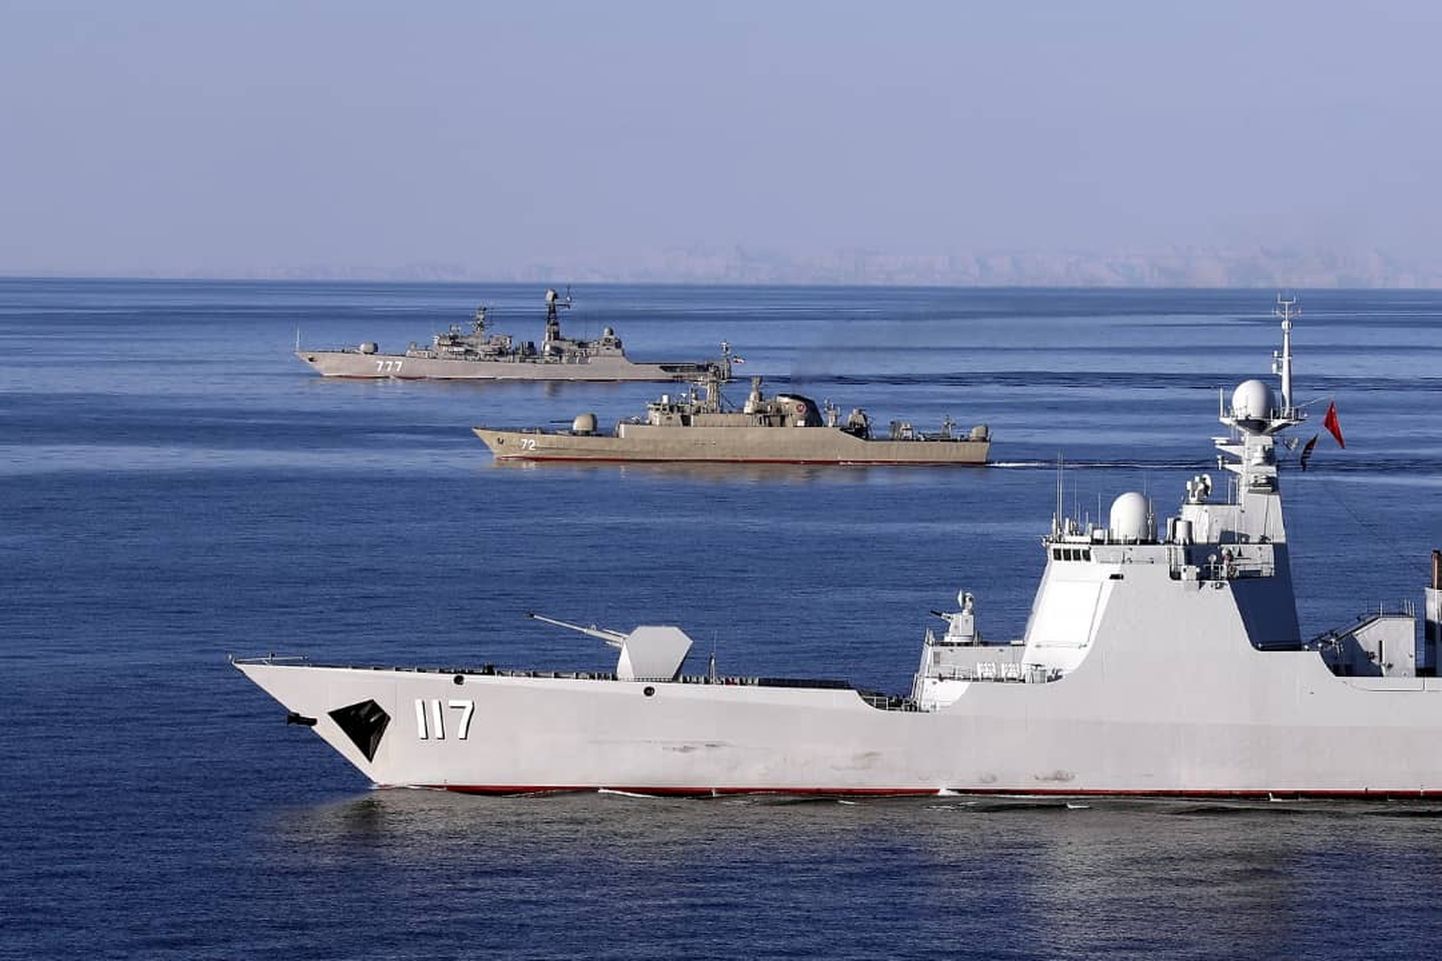 A handout photo made available by the Iranian Army office on December 28, 2019 shows a view of the Chinese People's Liberation Army Navy Surface Force Type 052D destroyer Xining (117), the Islamic Republic of Iran Navy frigate "ALBORZ" (72), and the Russian Navy Neustrashimyy-class frigate "Yaroslav Mudry" during joint Iran-Russia-China naval drills in the Indian Ocean and the Gulf of Oman. - Iran, China and Russia started four days of joint naval drills in the Indian Ocean and the Gulf of Oman, the commander of Iran's flotilla announced. The exercise comes at a time of heightened tensions since the United States withdrew from a landmark 2015 nuclear deal with Iran in May 2018. (Photo by HO / Iranian Army office / AFP) / === RESTRICTED TO EDITORIAL USE - MANDATORY CREDIT "AFP PHOTO / HO / Iranian Army office" - NO MARKETING NO ADVERTISING CAMPAIGNS - DISTRIBUTED AS A SERVICE TO CLIENTS ===